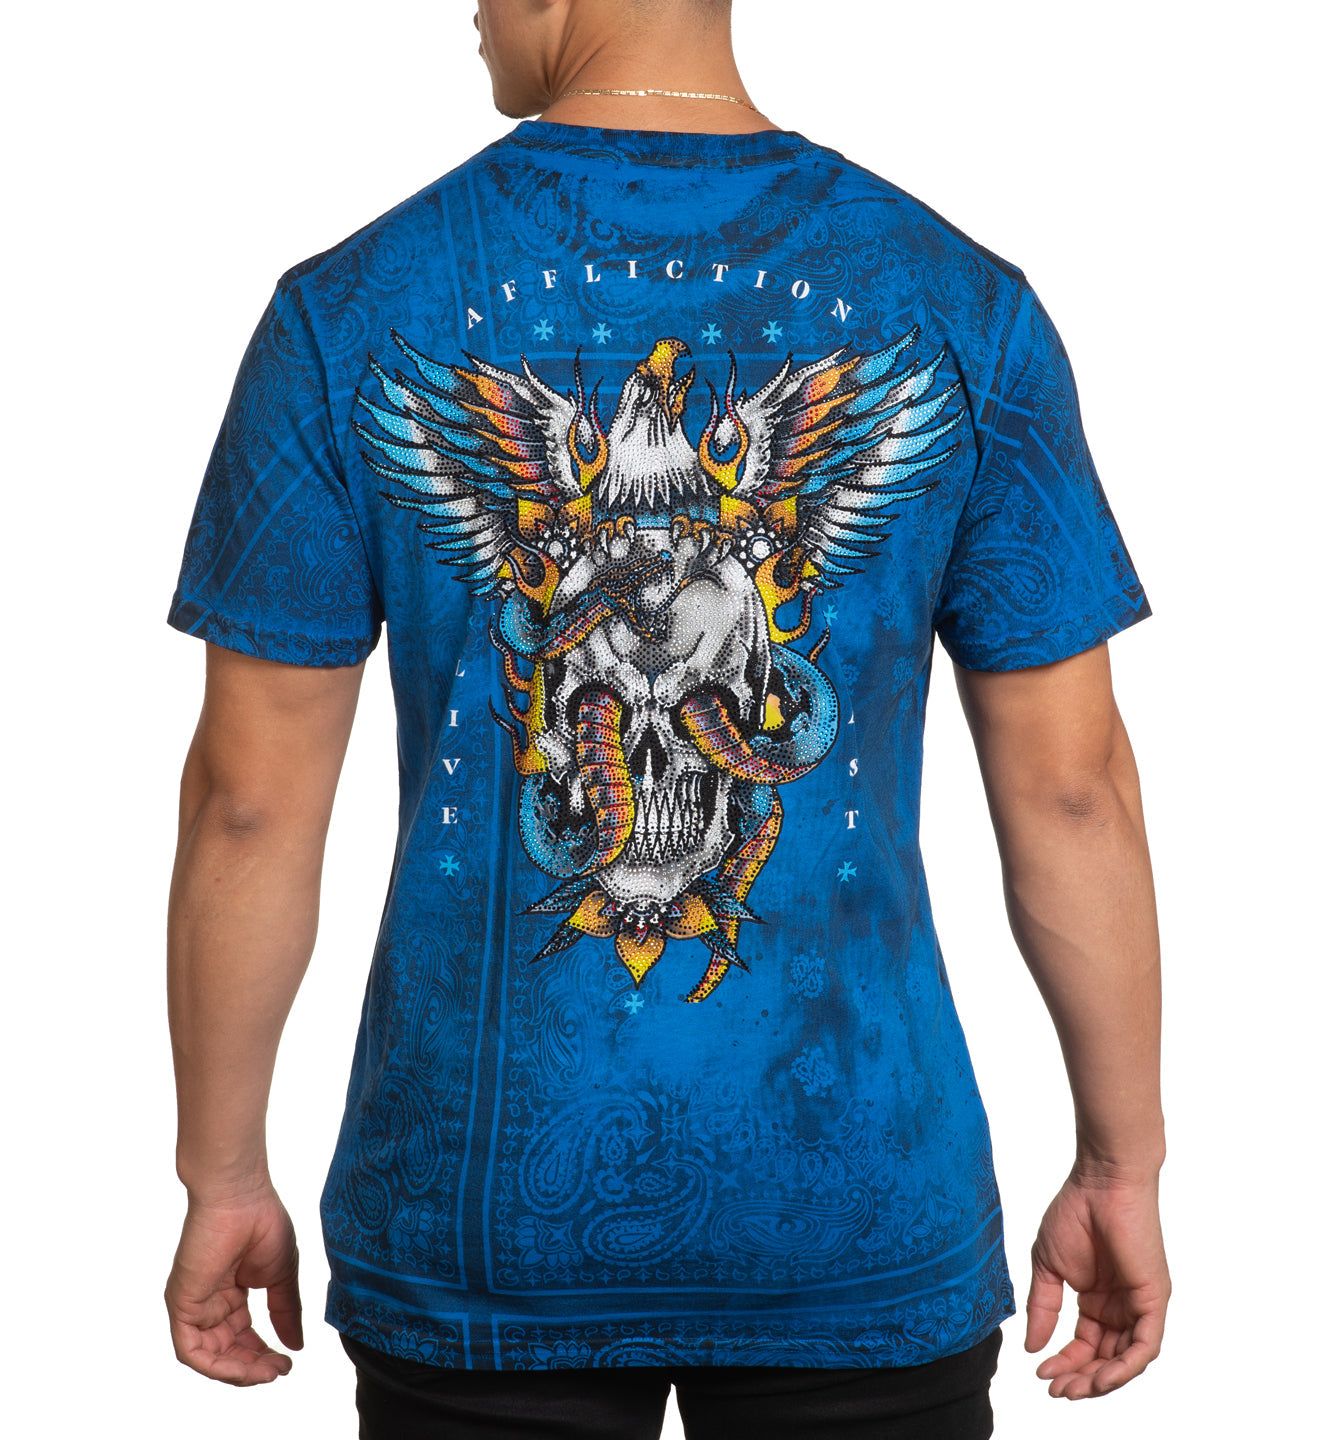 Sky Fire - Affliction Clothing